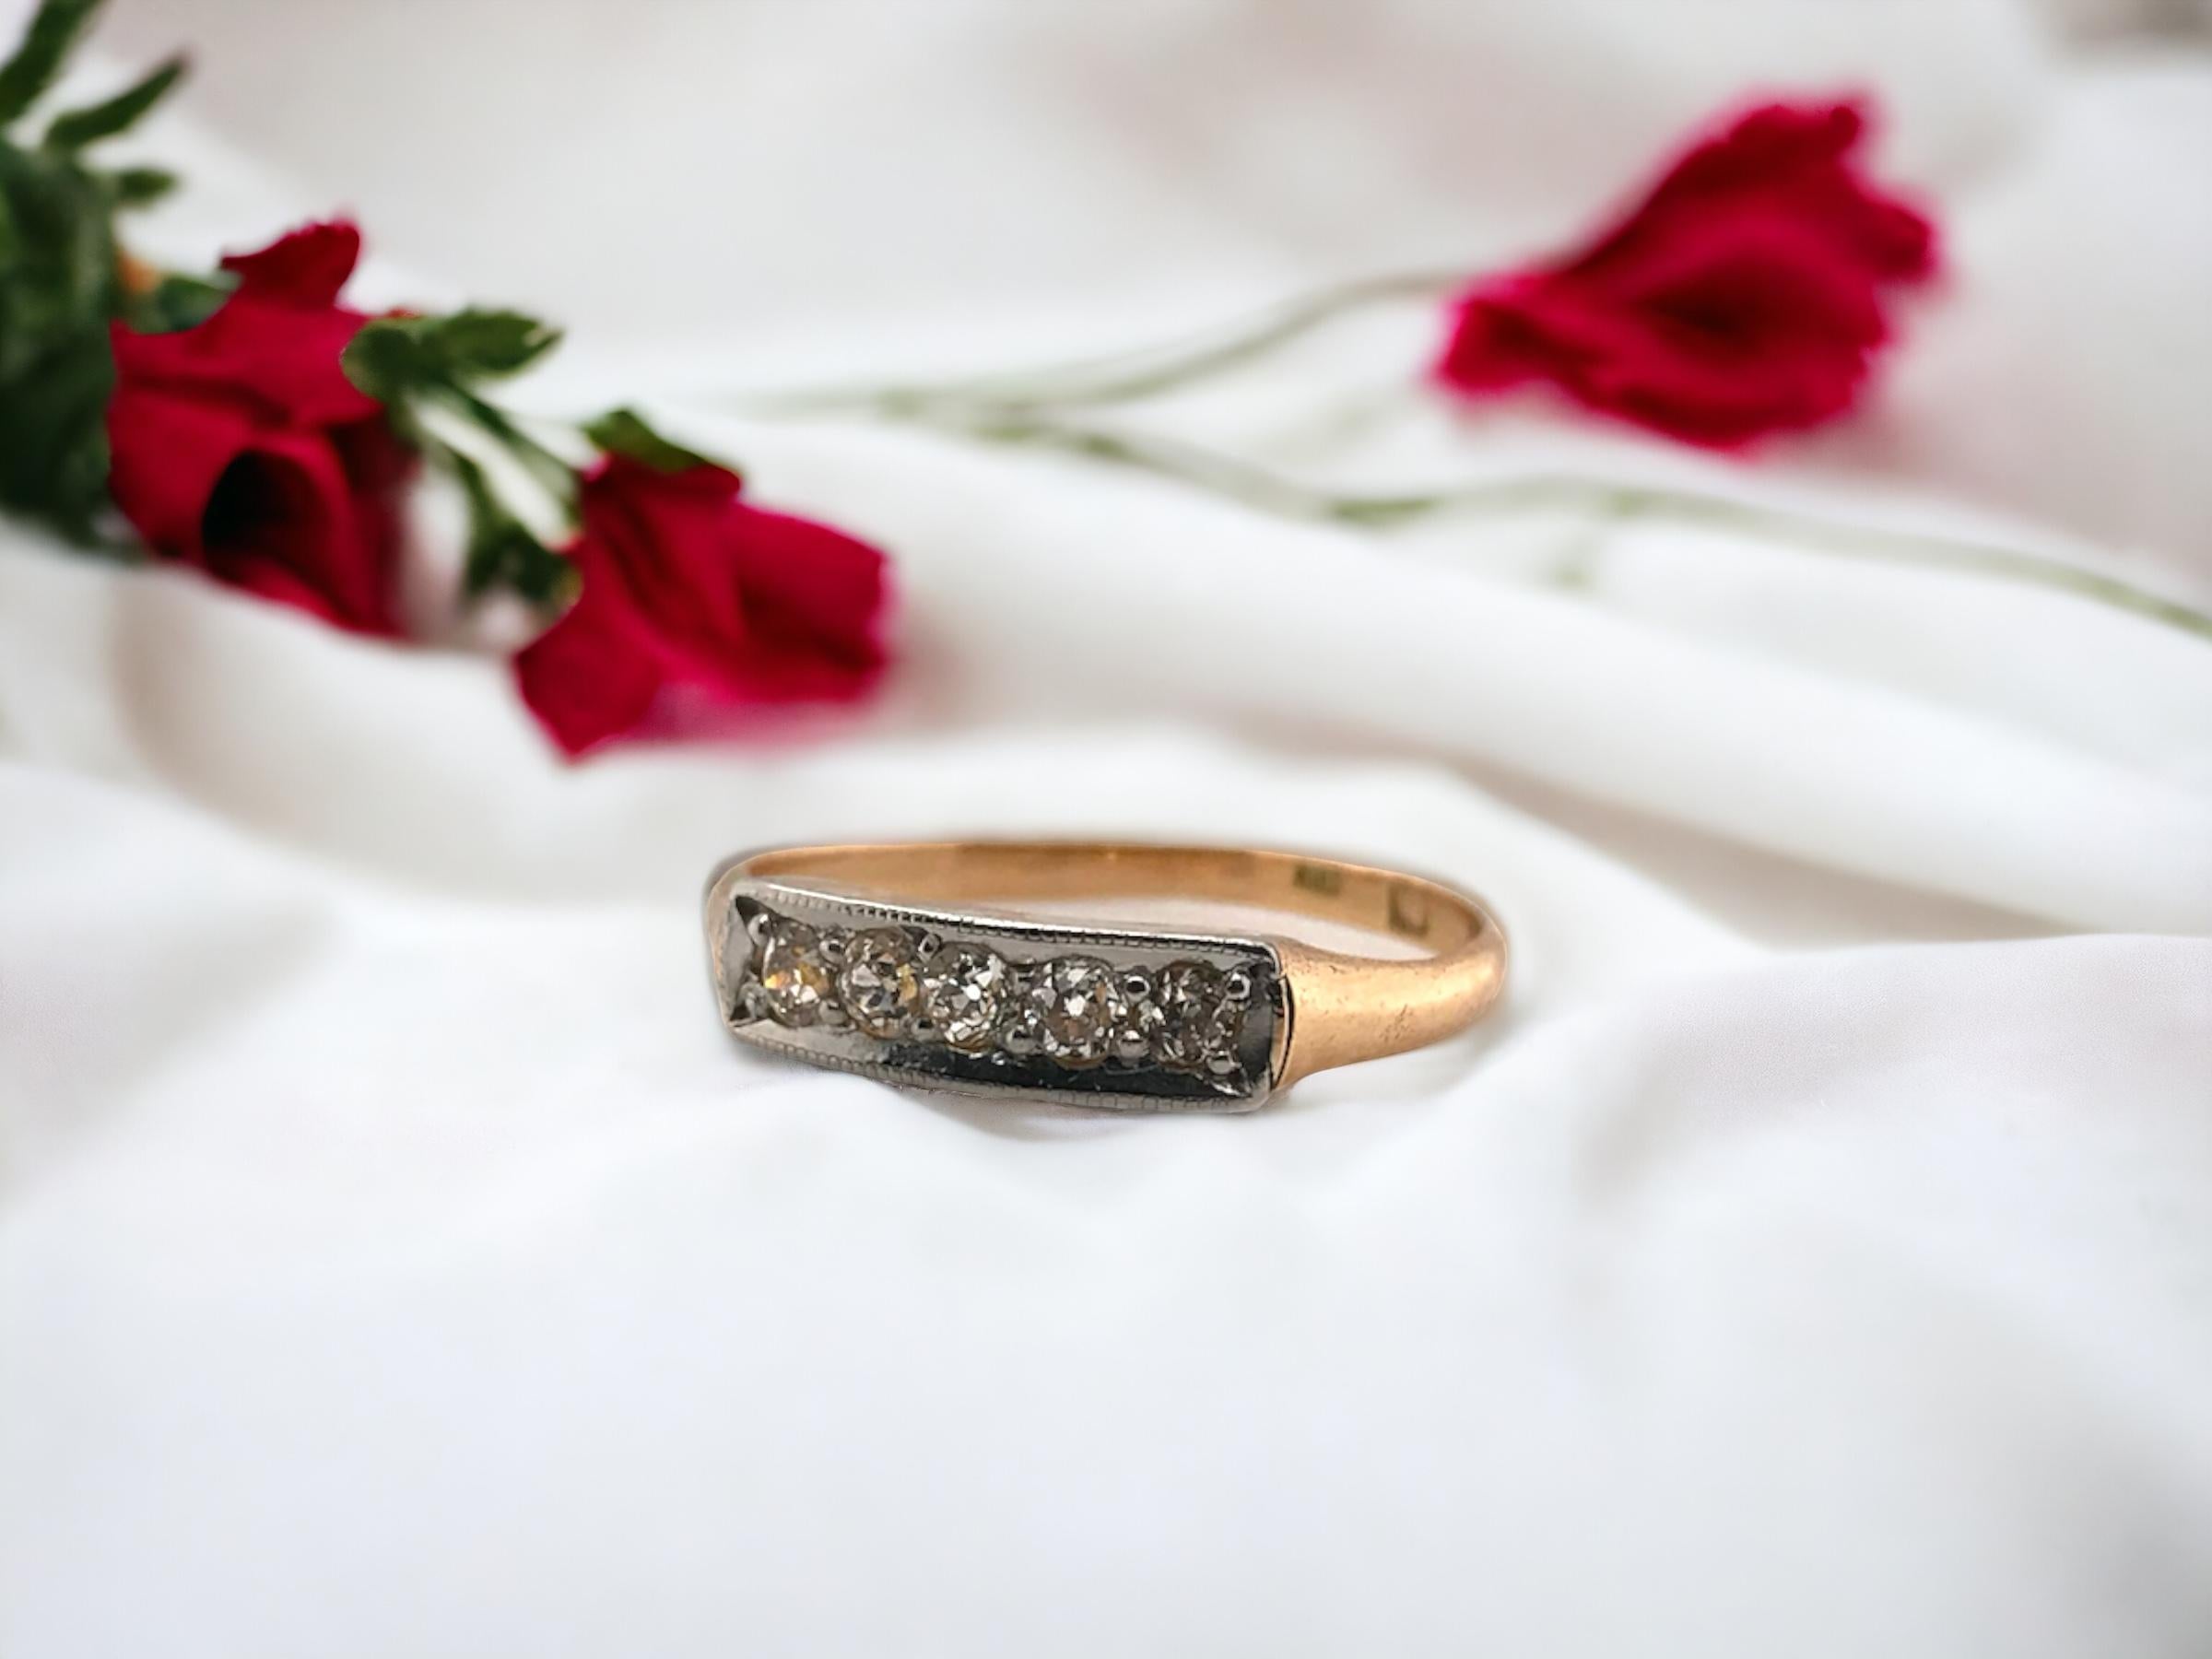 We love the dainty design of this vintage diamond band!

Ring Details
Material: 18K Rose Gold Shank; White Gold Top
Era: Art Deco 1910 - 1930
Weight: 1.8 Grams
Width: 3.5mm
Height: 2.15mm
Finger Size: 5
Sizable Upon Request

Accented by the